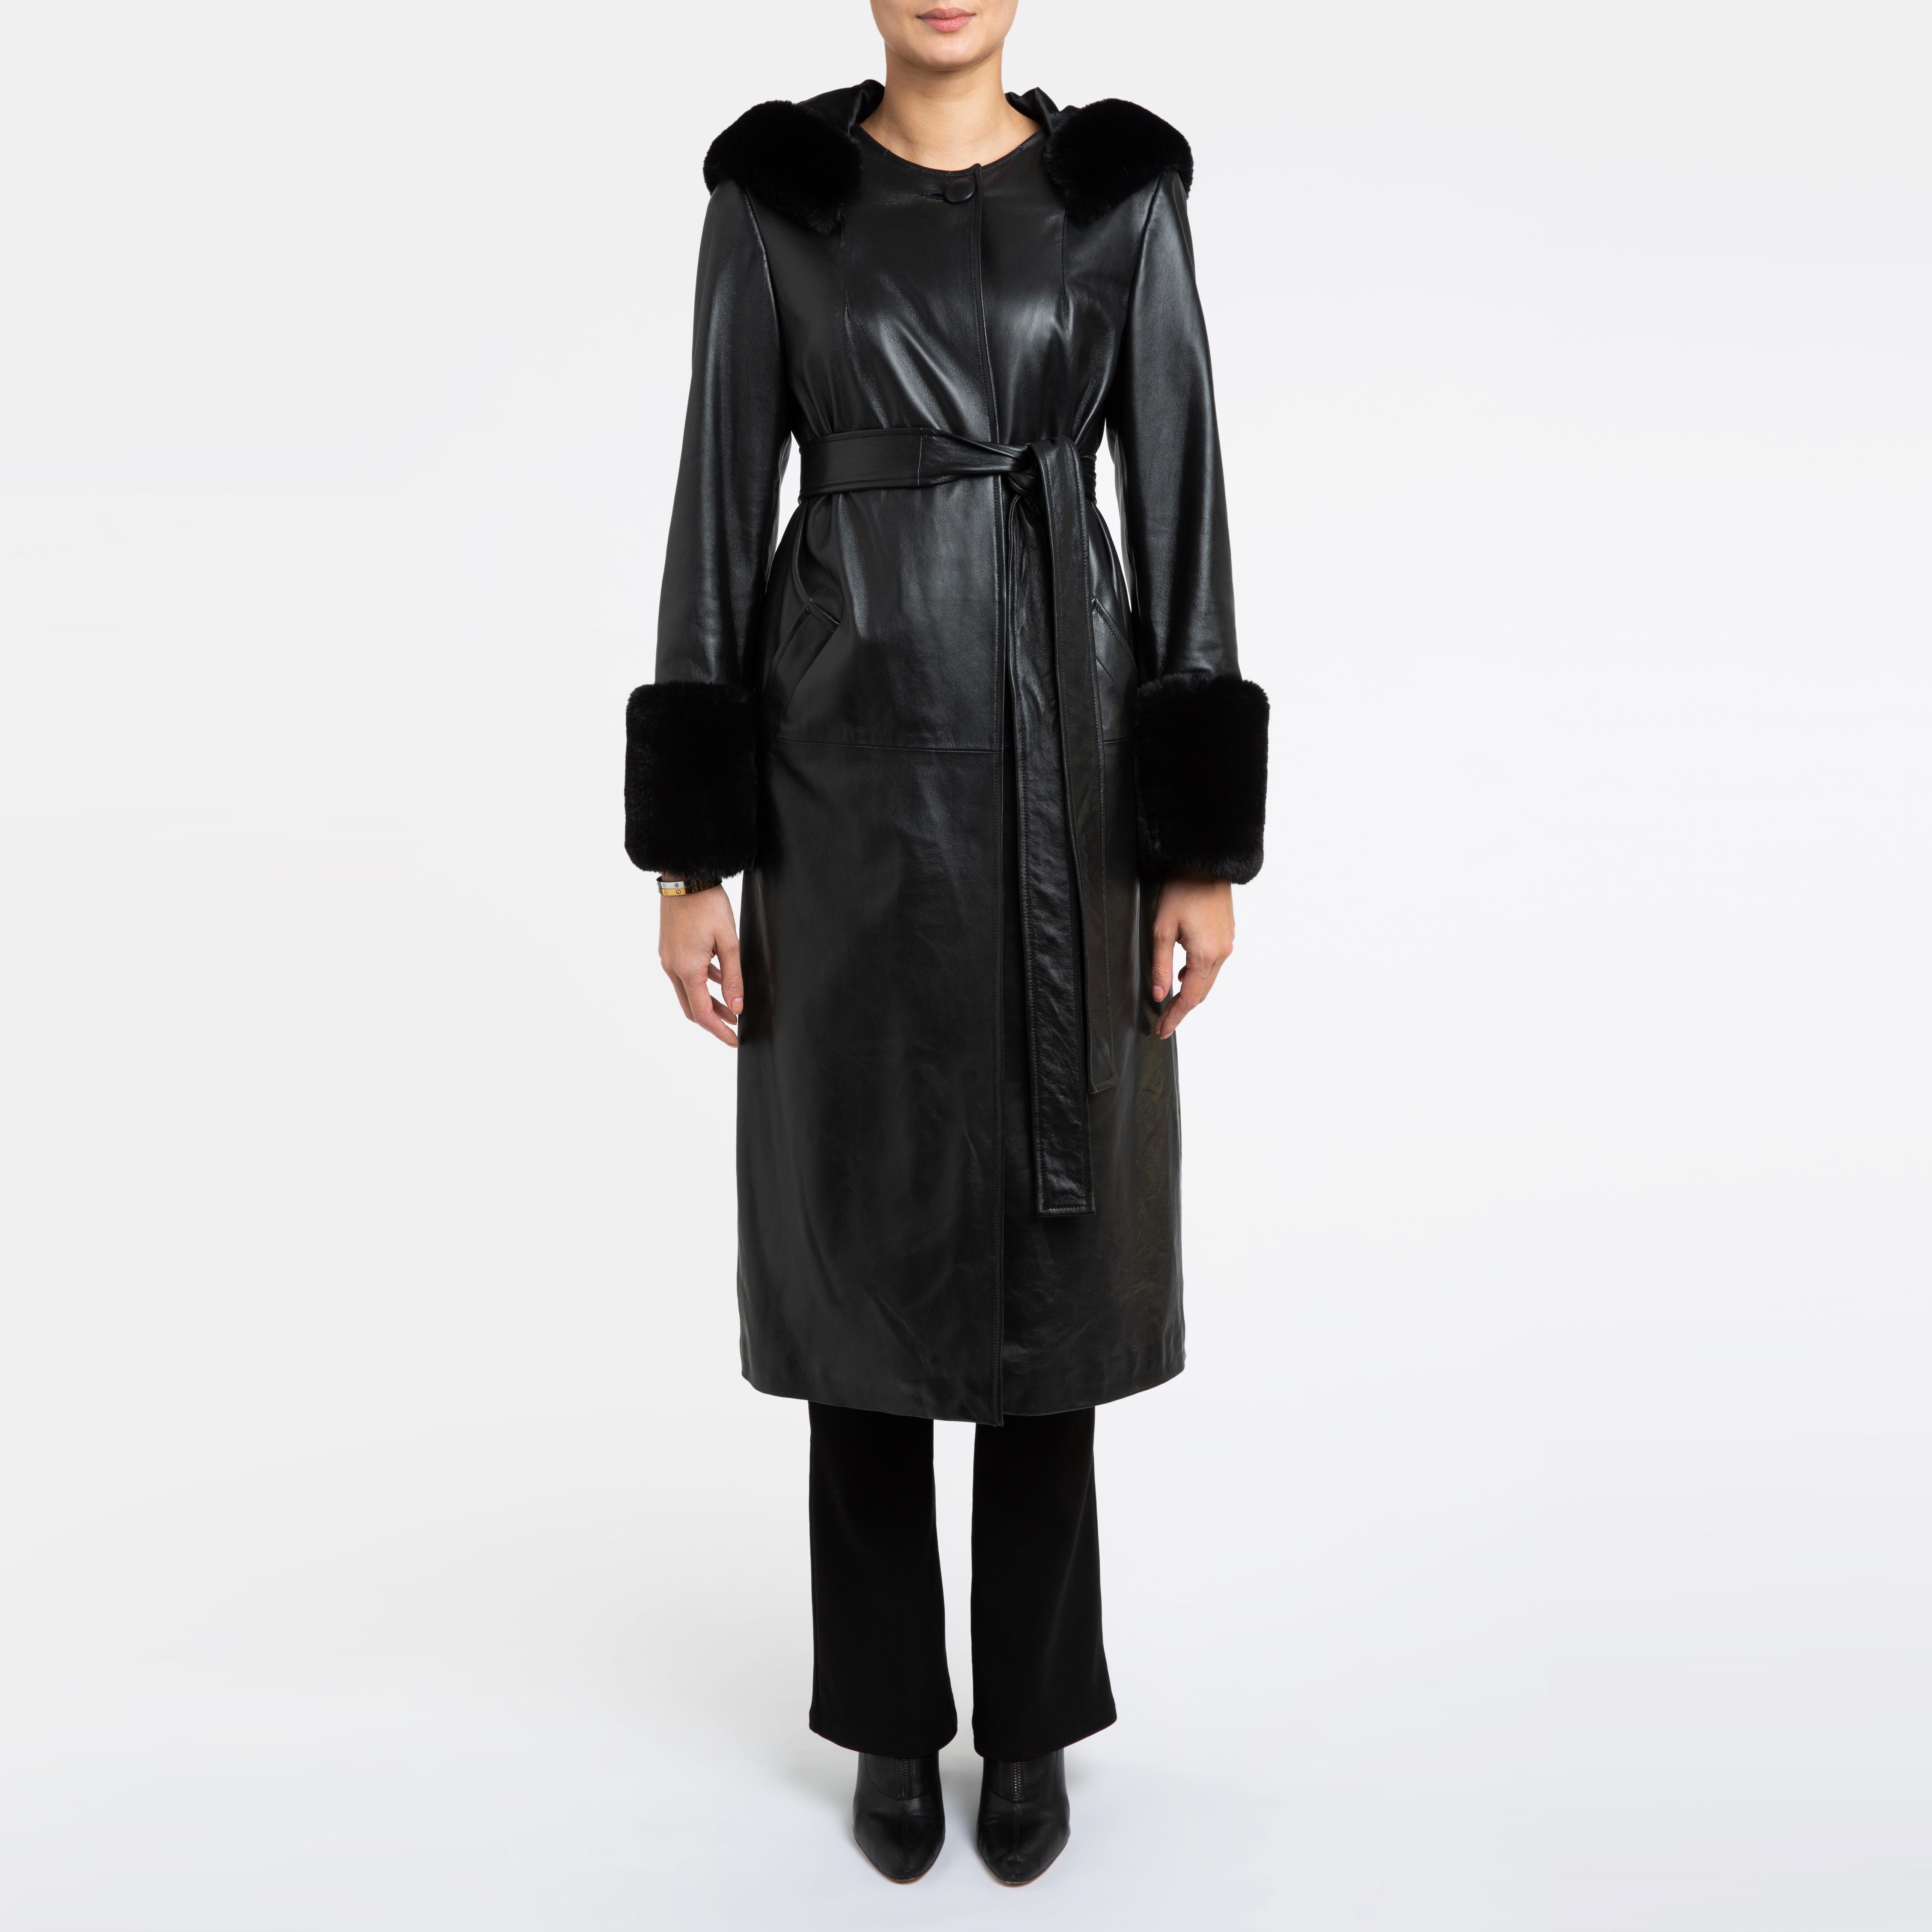 Verheyen London Hooded Leather Trench Coat in Black with Faux Fur - Size uk 10

Handmade in London, made with 100% Italian Lambs Leather and the highest quality of faux fur to match, this luxury item is an investment piece to wear for a lifetime.